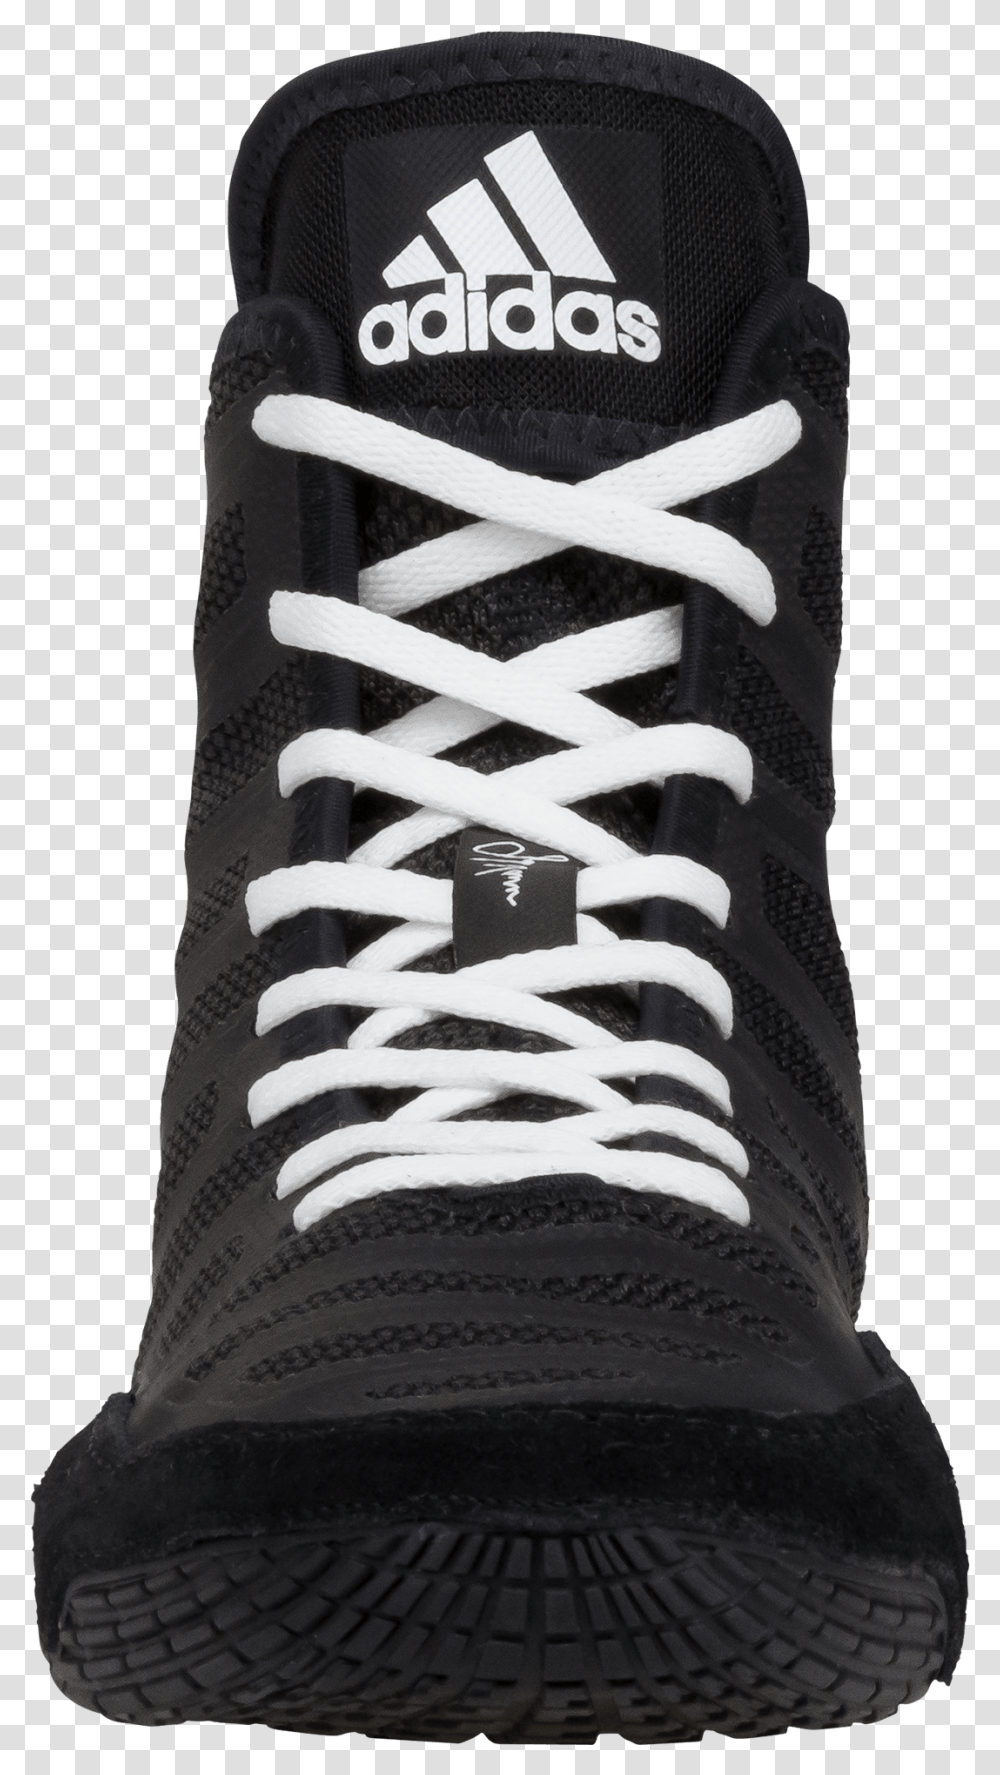 Adidas Shoes Clipart One Shoe Black Adidas Shoes Front, Apparel, Footwear, Sneaker Transparent Png